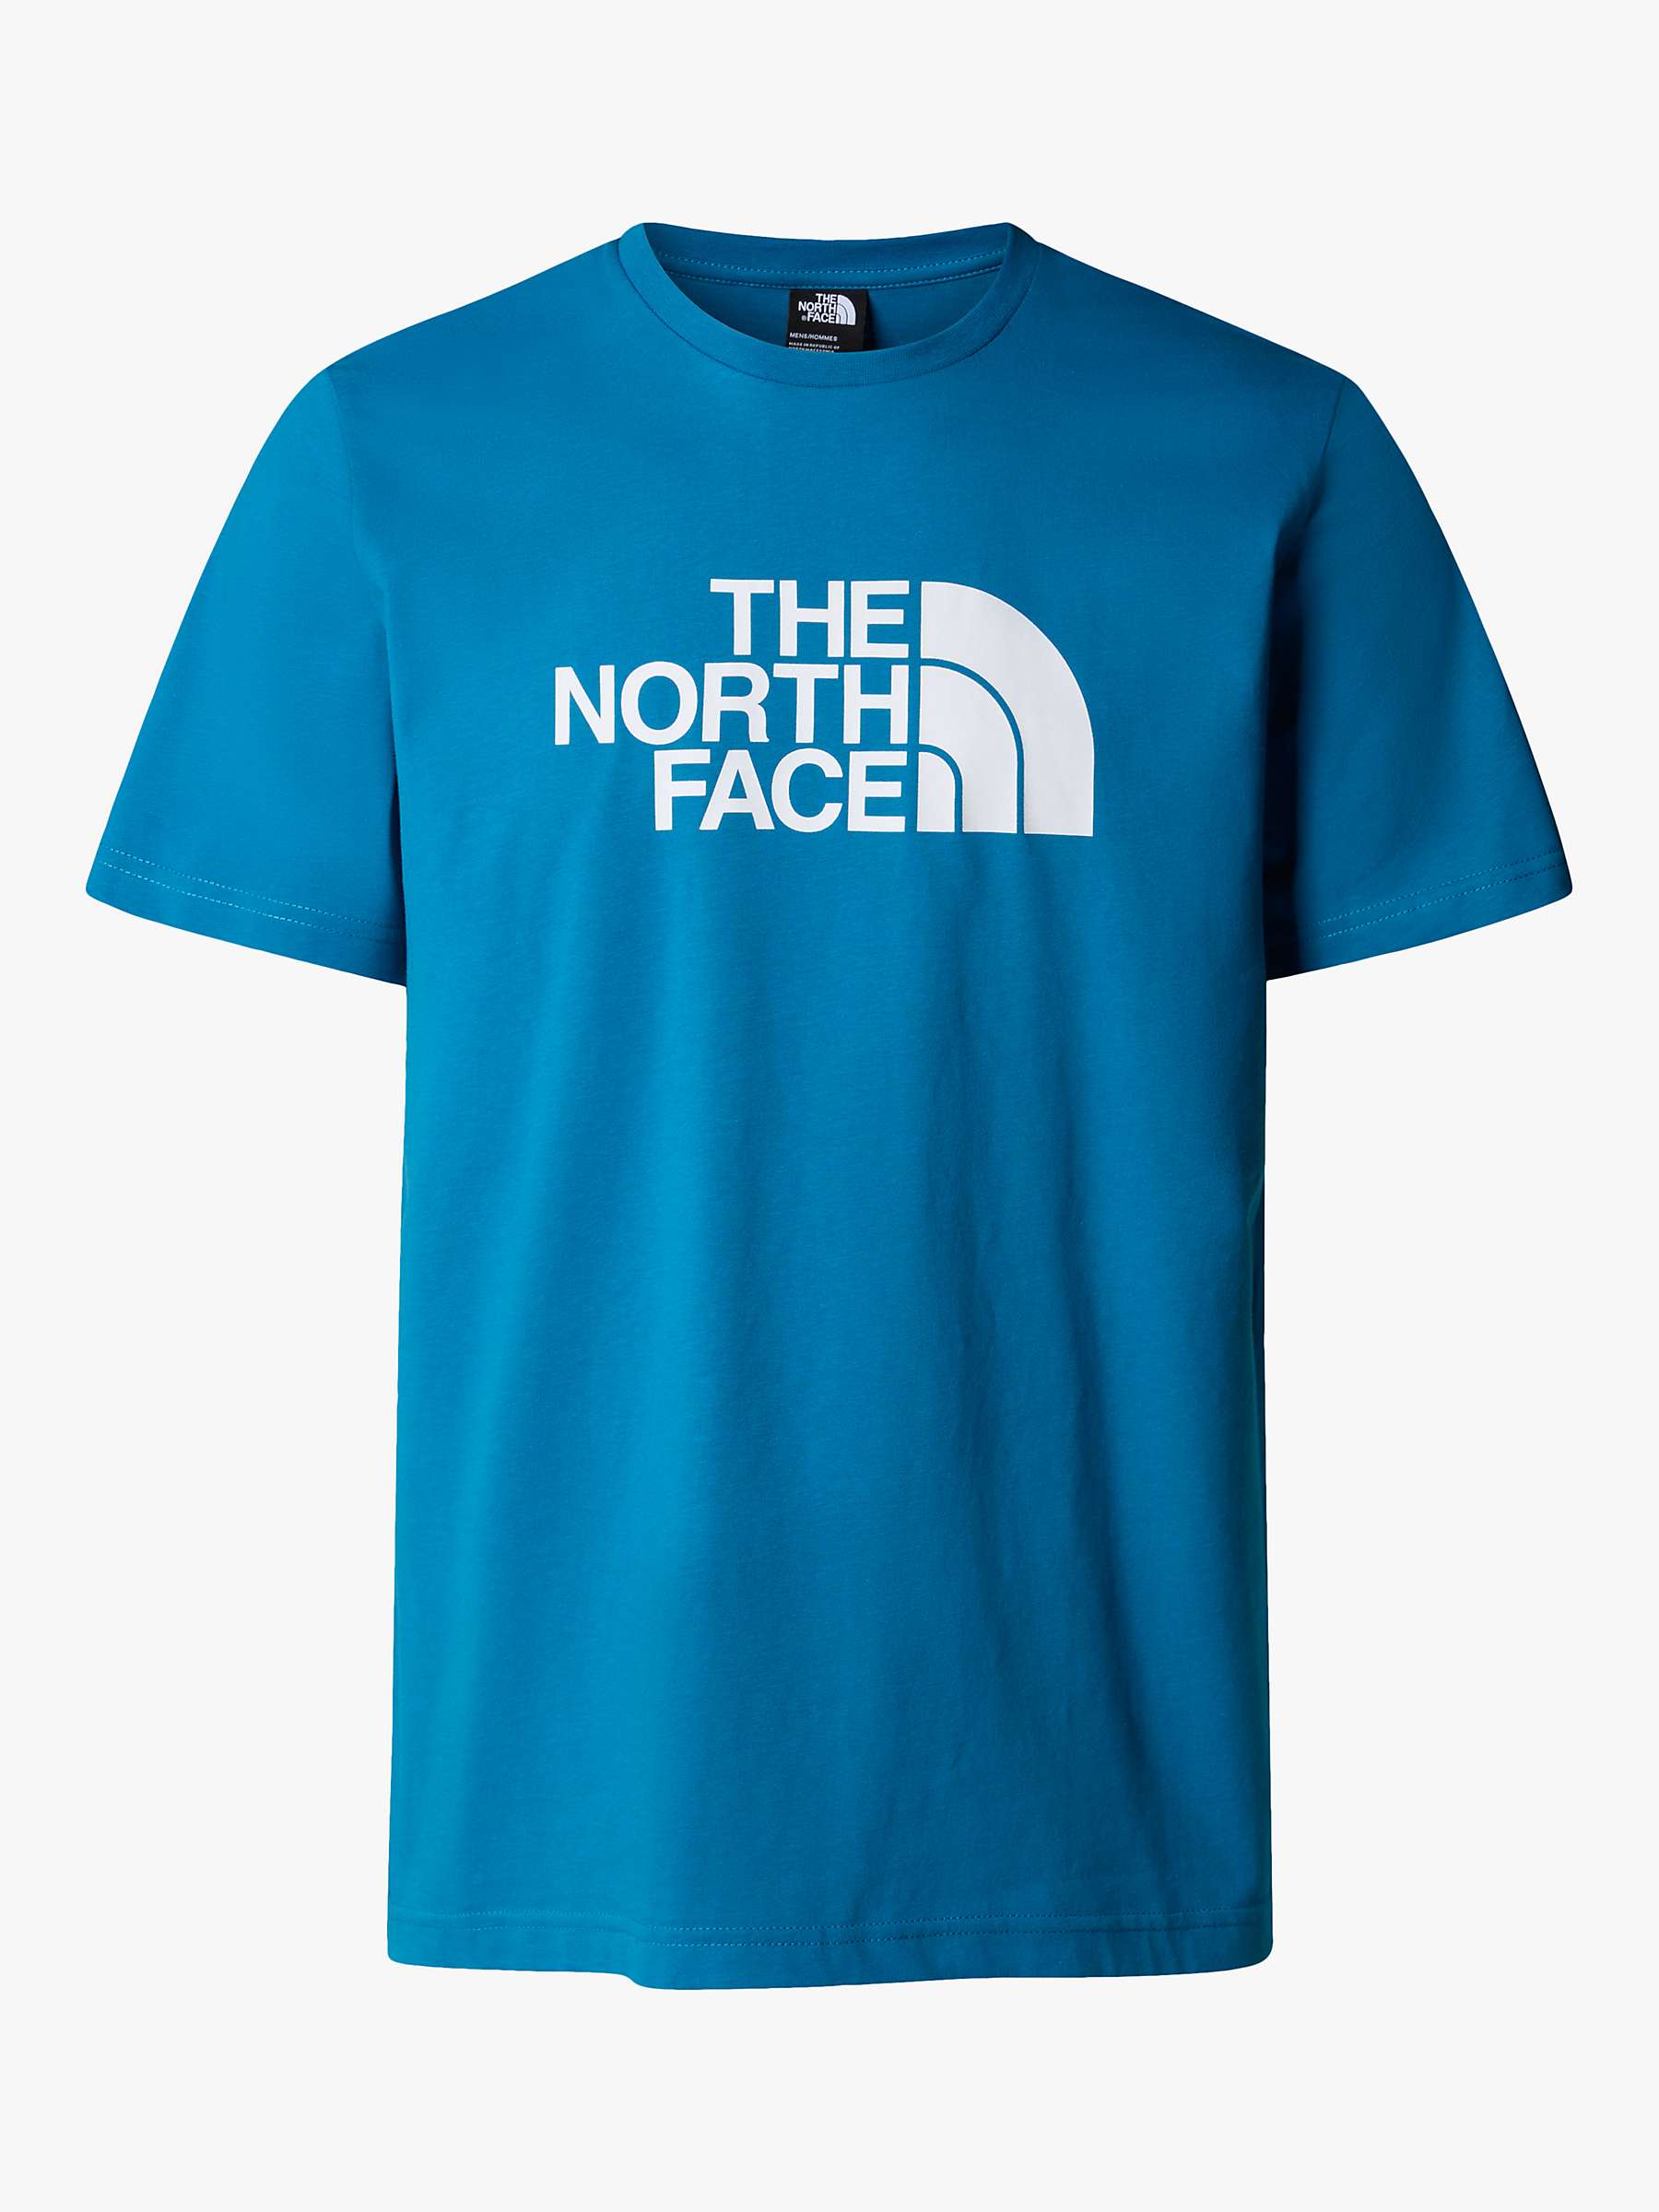 Buy The North Face Easy Short Sleeve T-Shirt, Adriatic Blue Online at johnlewis.com